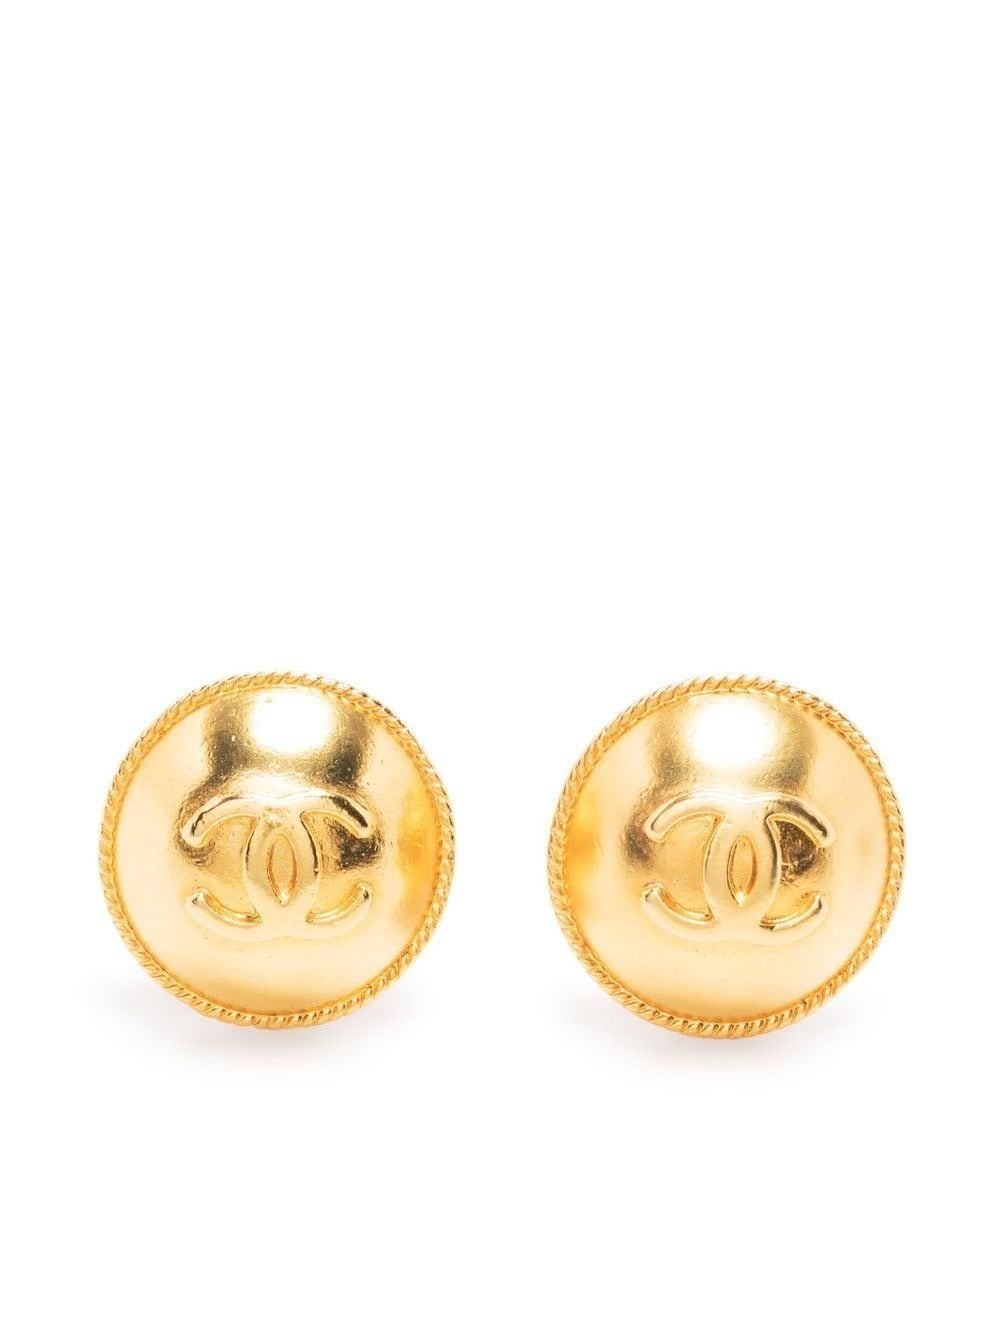 1995 Chanel gold-tone clip-on earrings featuring a gold-tone logo, a clip-on fastening, back plaque pitted logo Chanel on clip. 
These earrings come as a pair.
Circa 1995
Diameter: 0.8in. (2cm) 
In good vintage condition. Made in France.
We